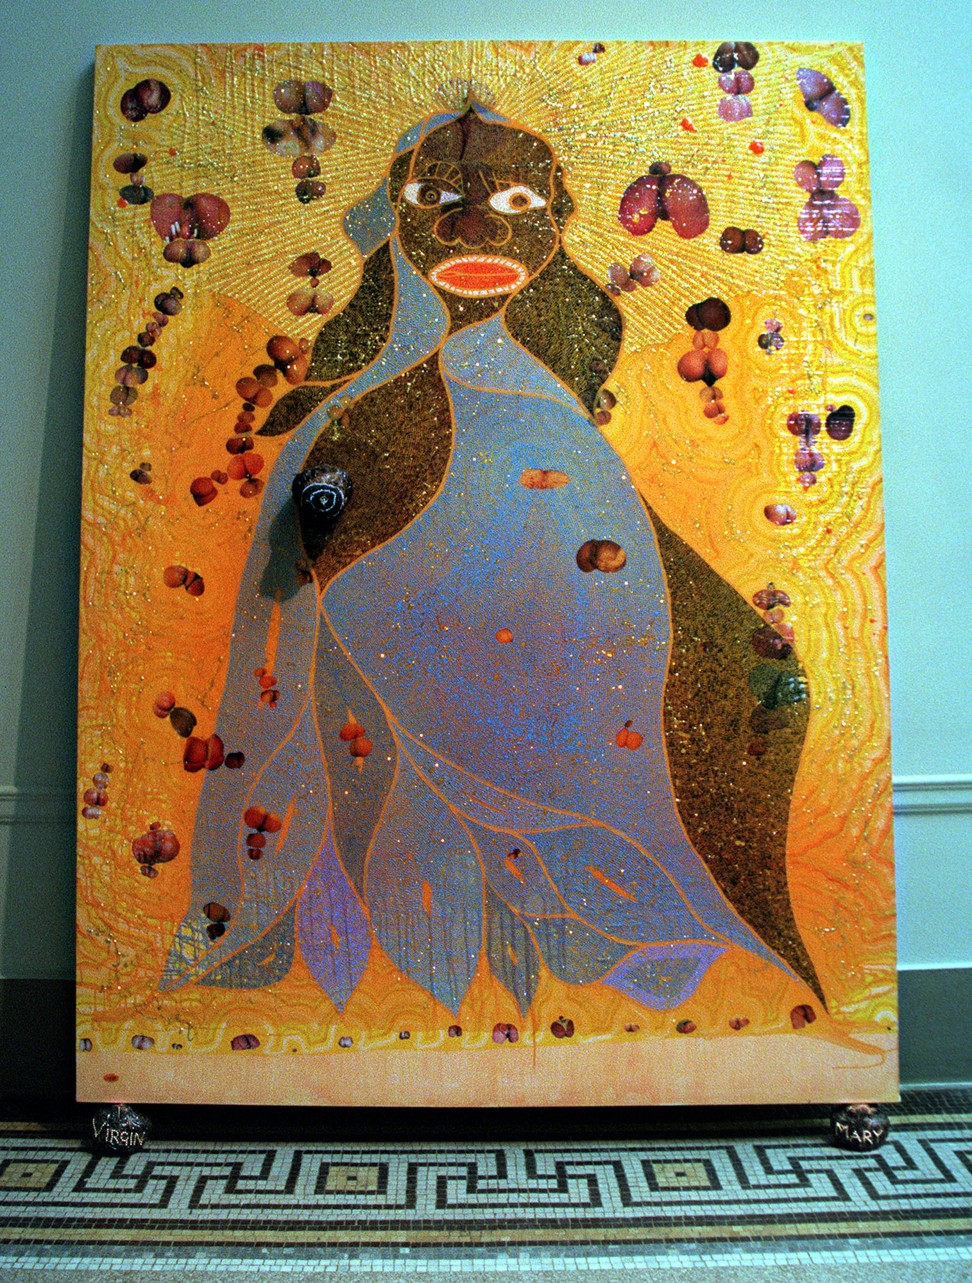 Chris Ofili’s “The Holy Virgin Mary” at the Brooklyn Museum of Art. Photo: AP